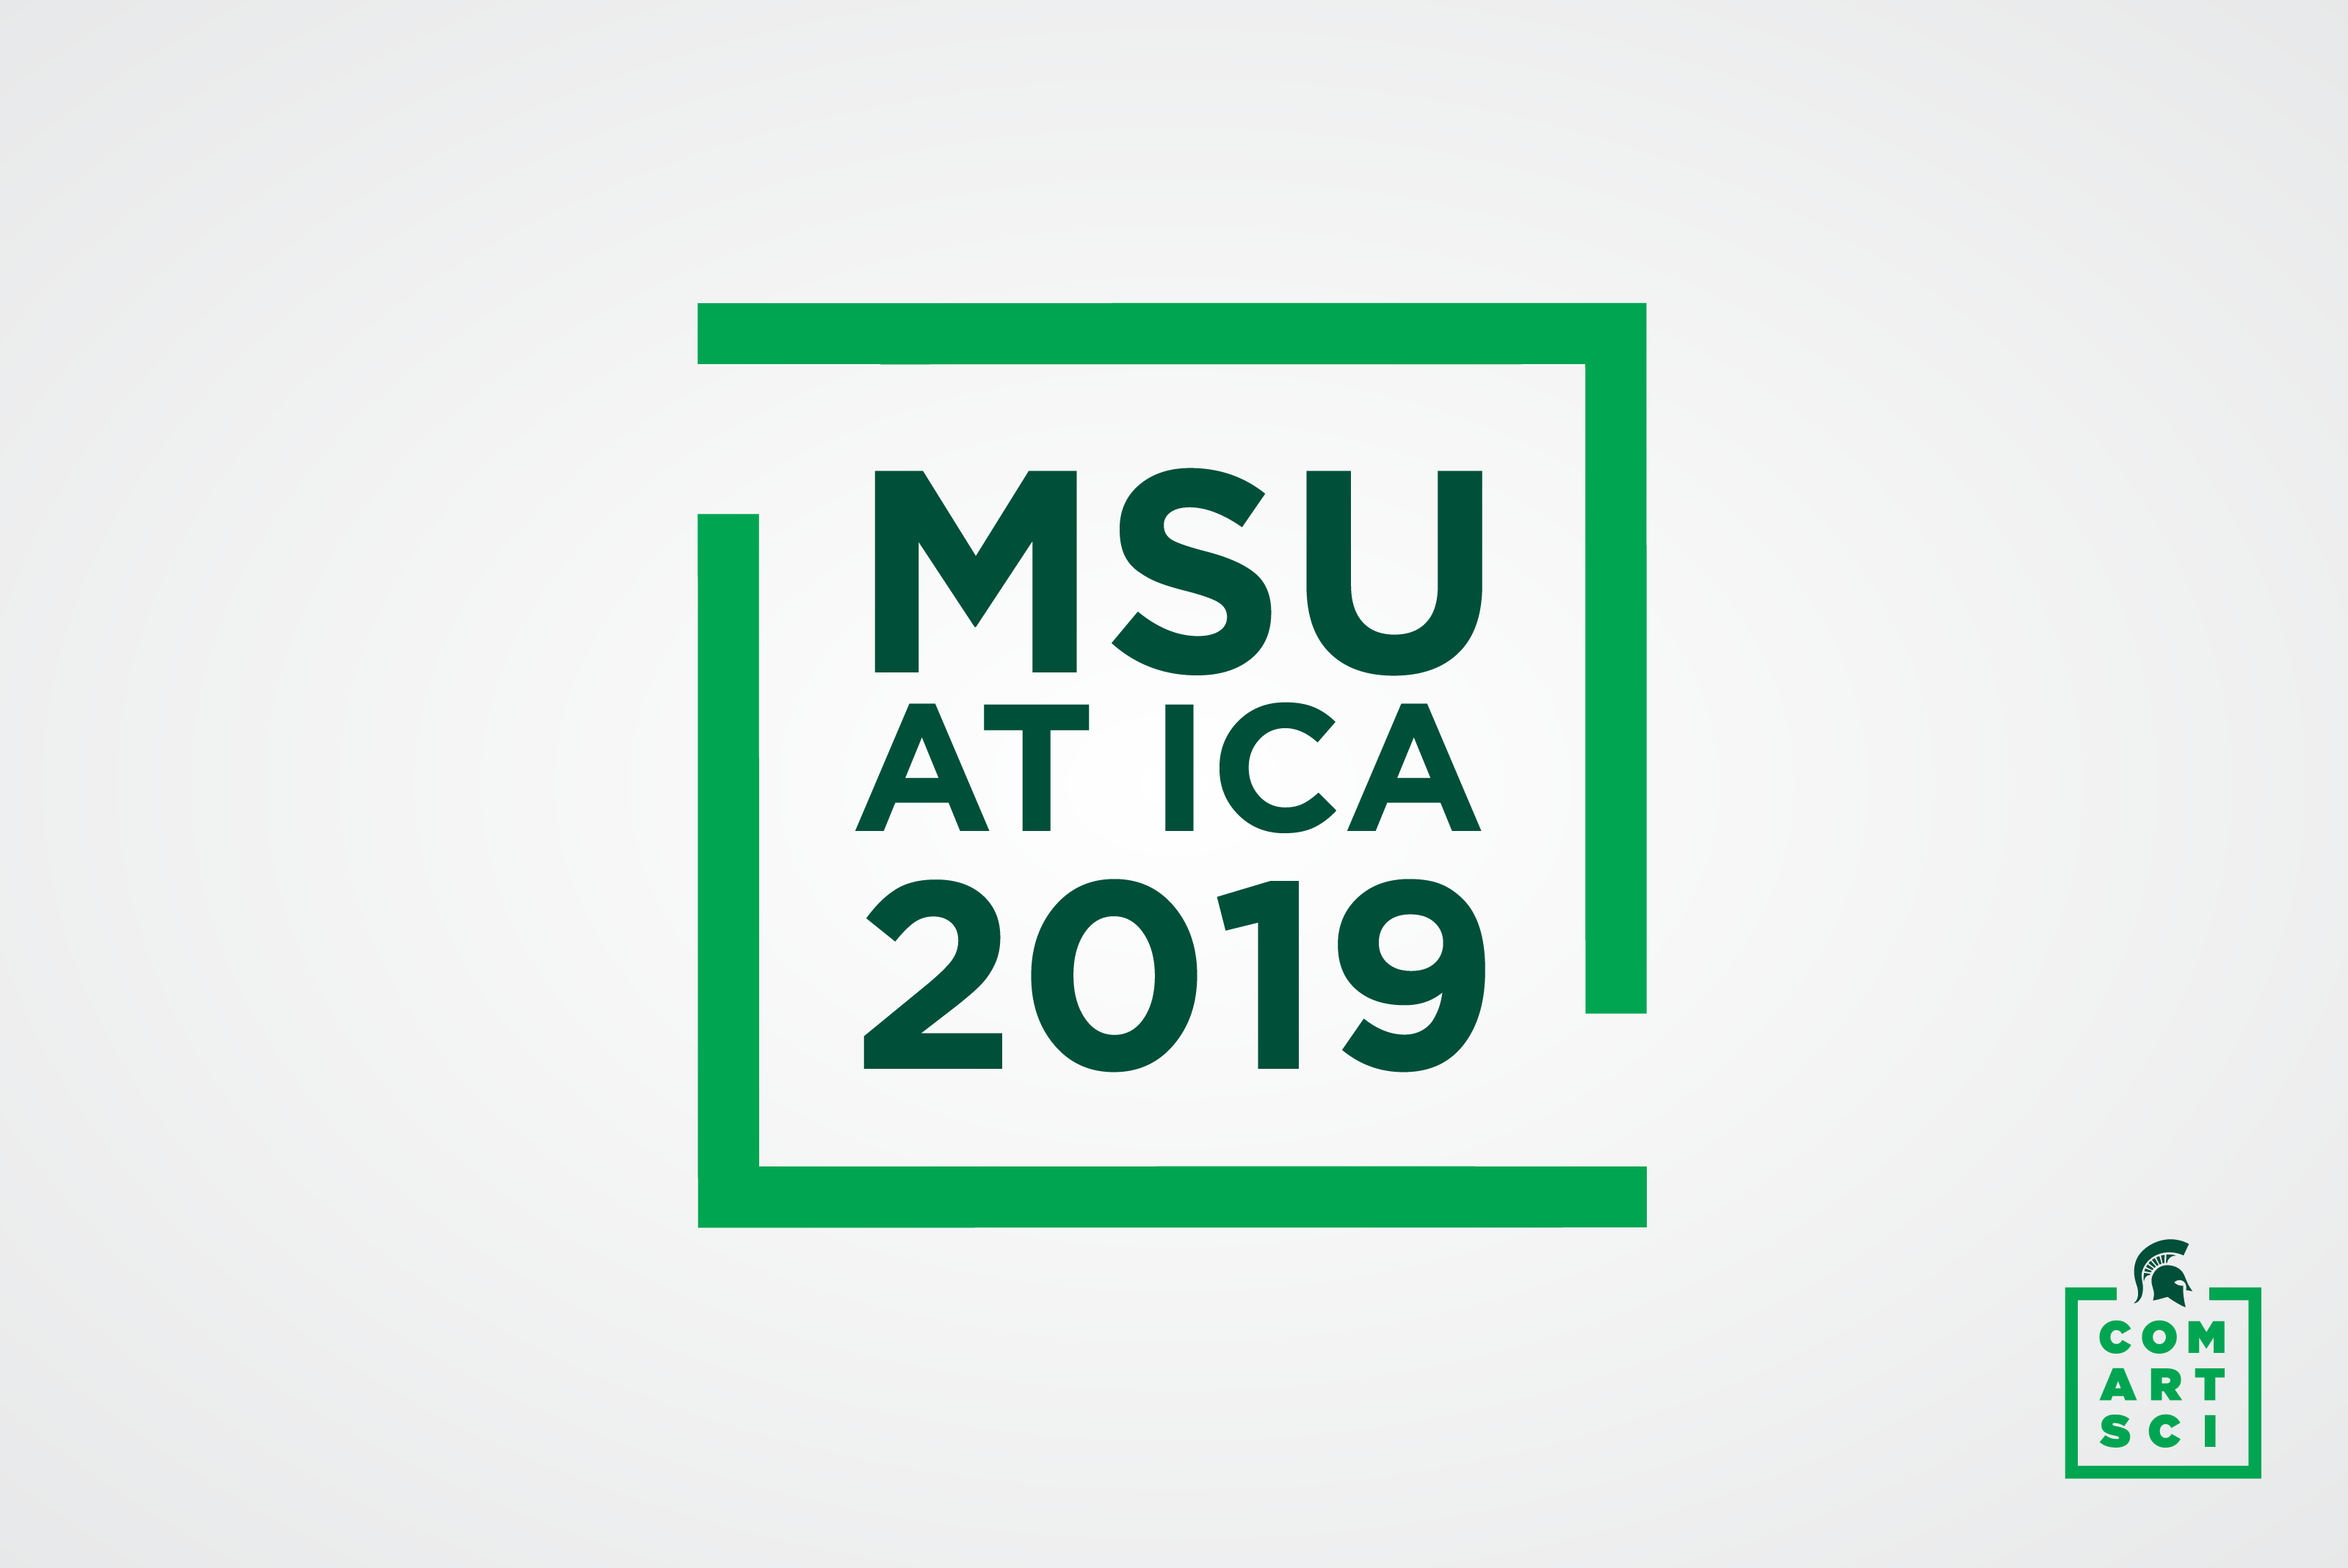 Graphic for MSU at ICA 2019